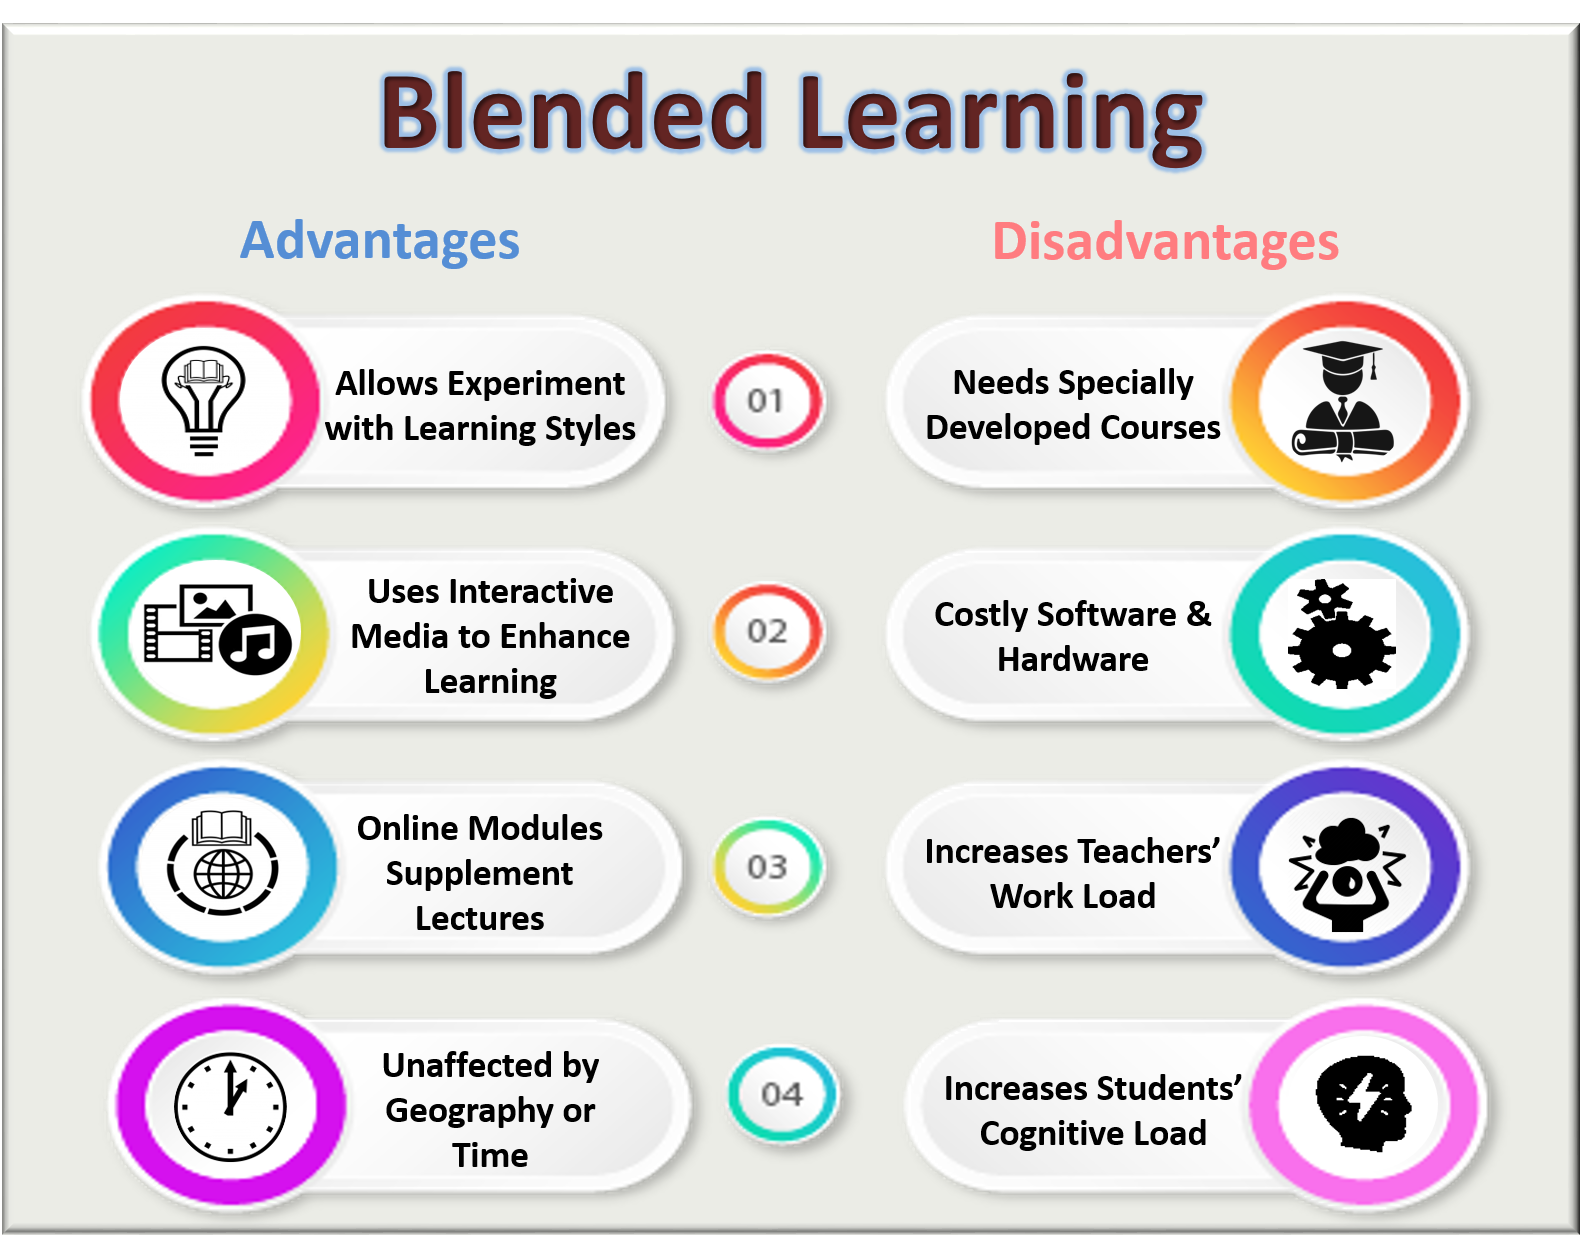 Blended Learning Advantages and Disadvantages